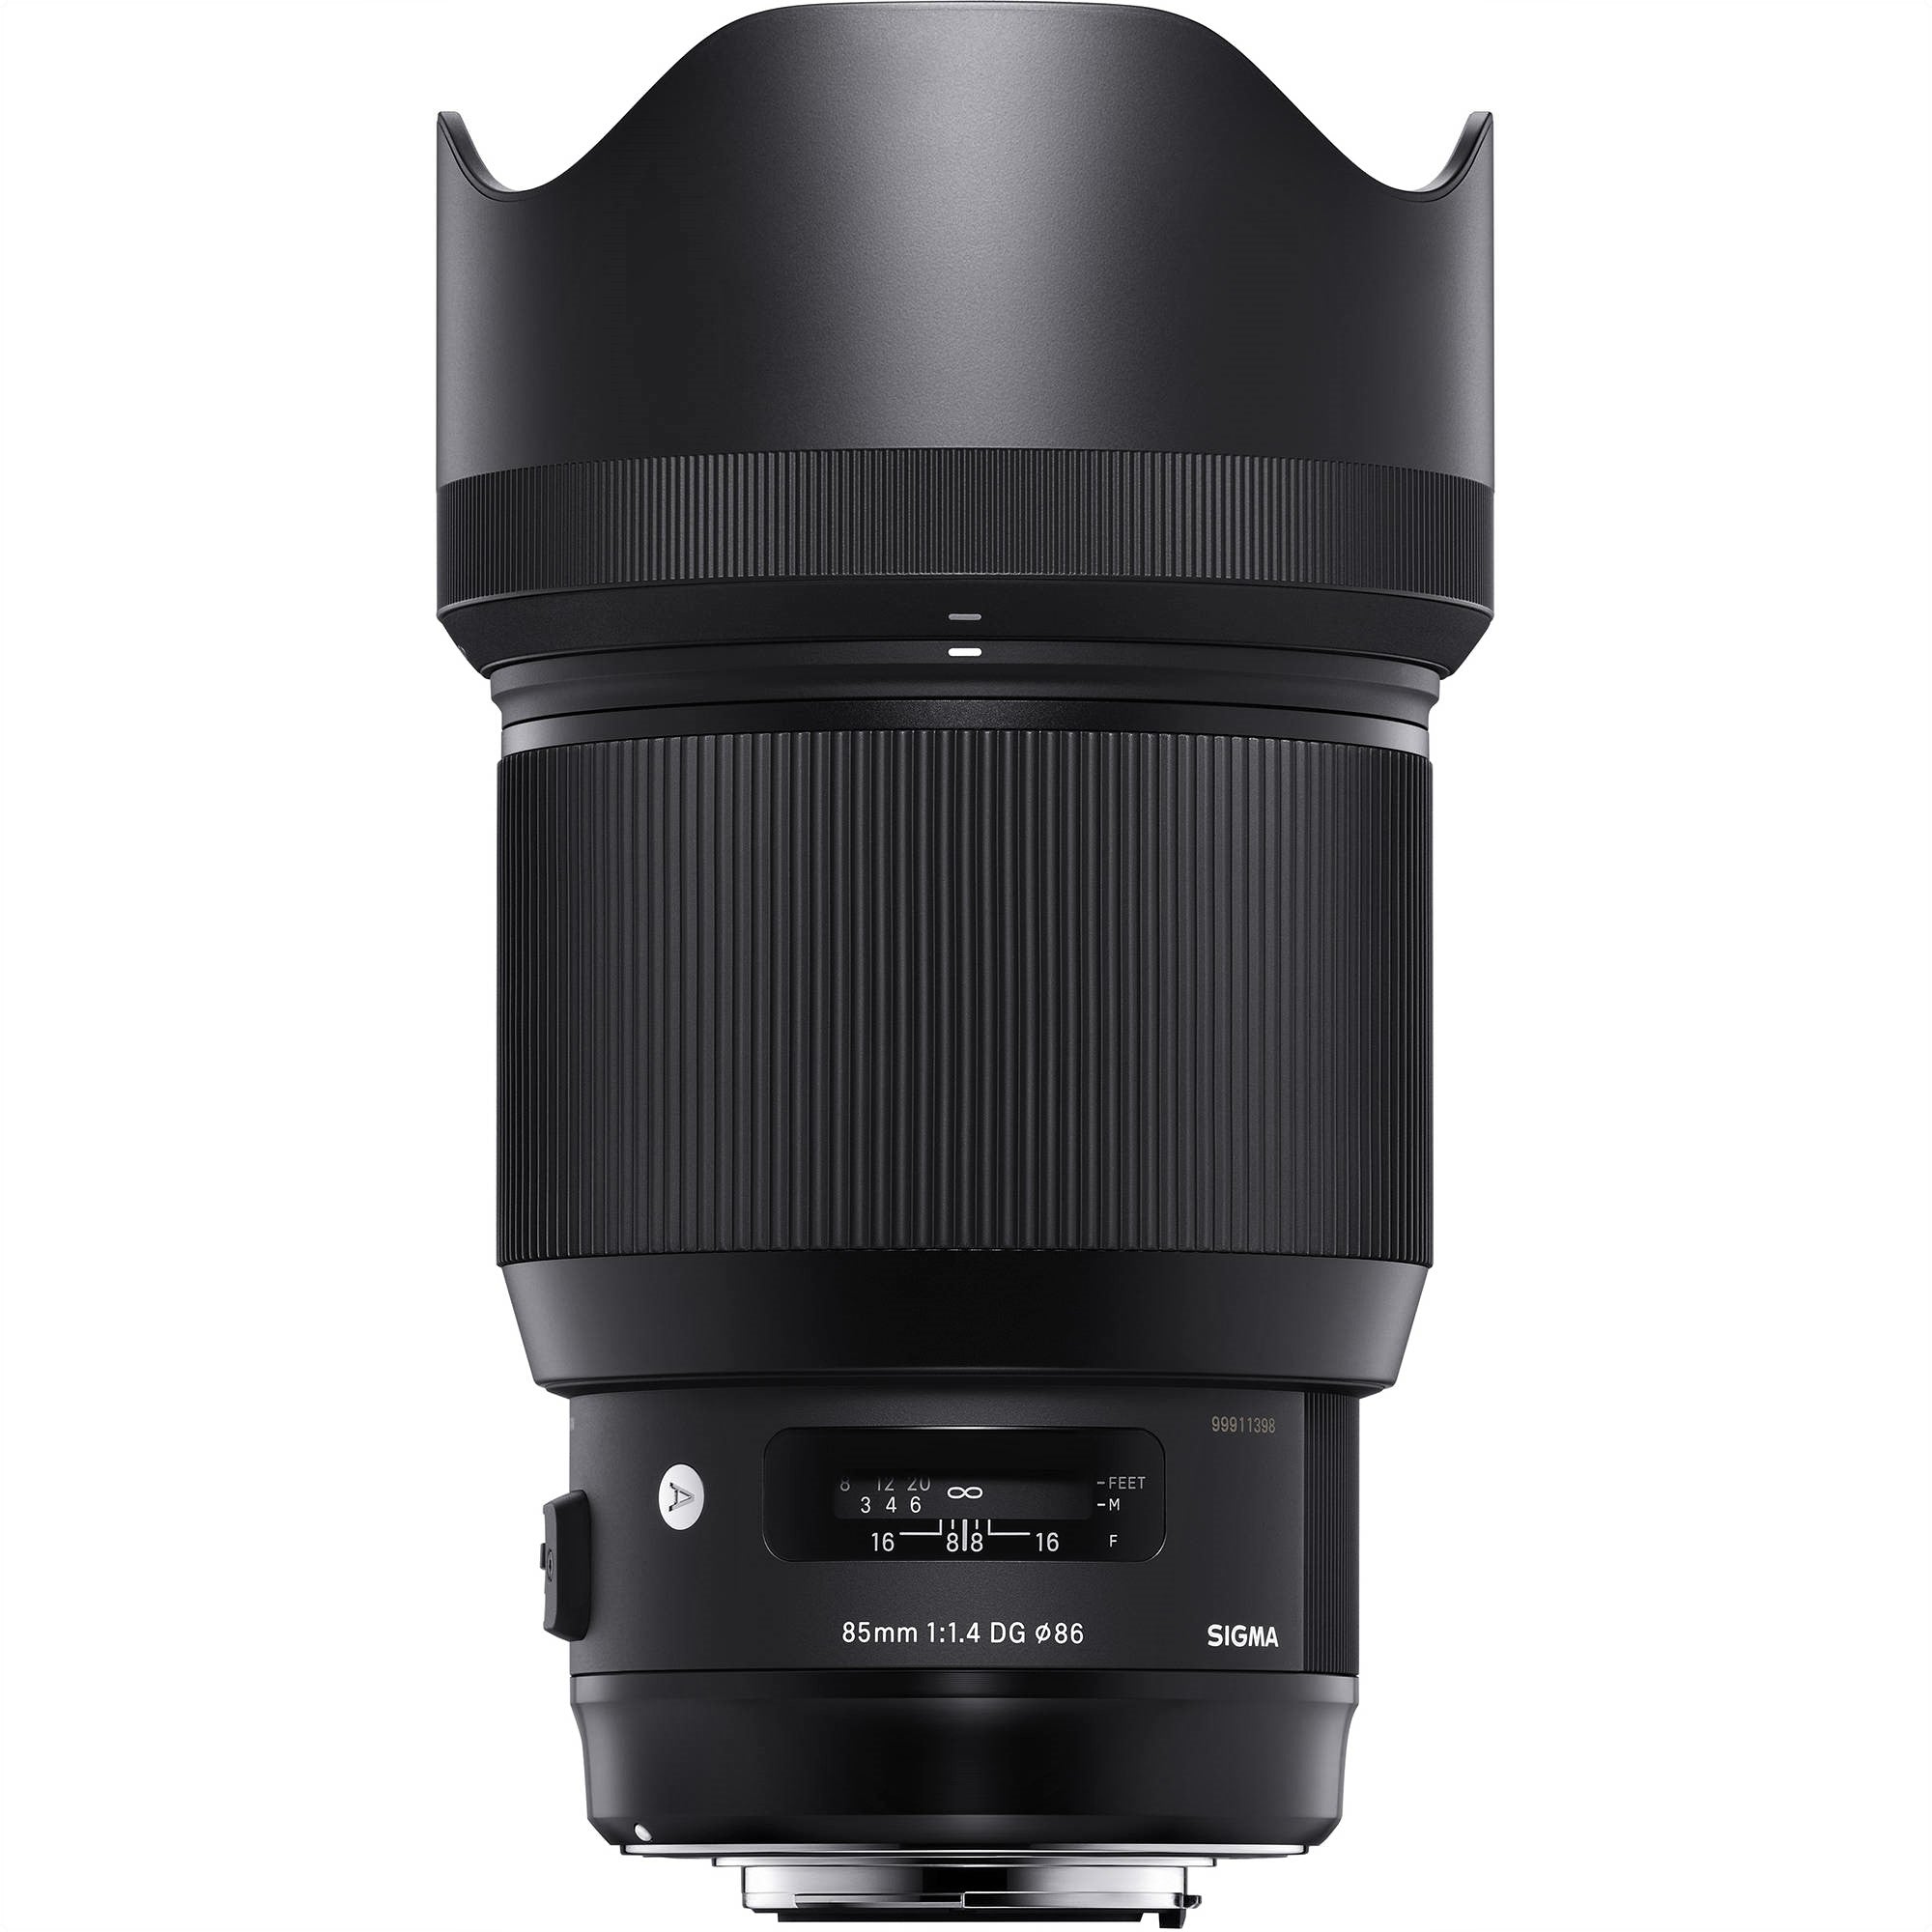 Sigma 85mm F1.4 DG HSM Art Lens for Canon EF with Attached Lens Hood on the Top